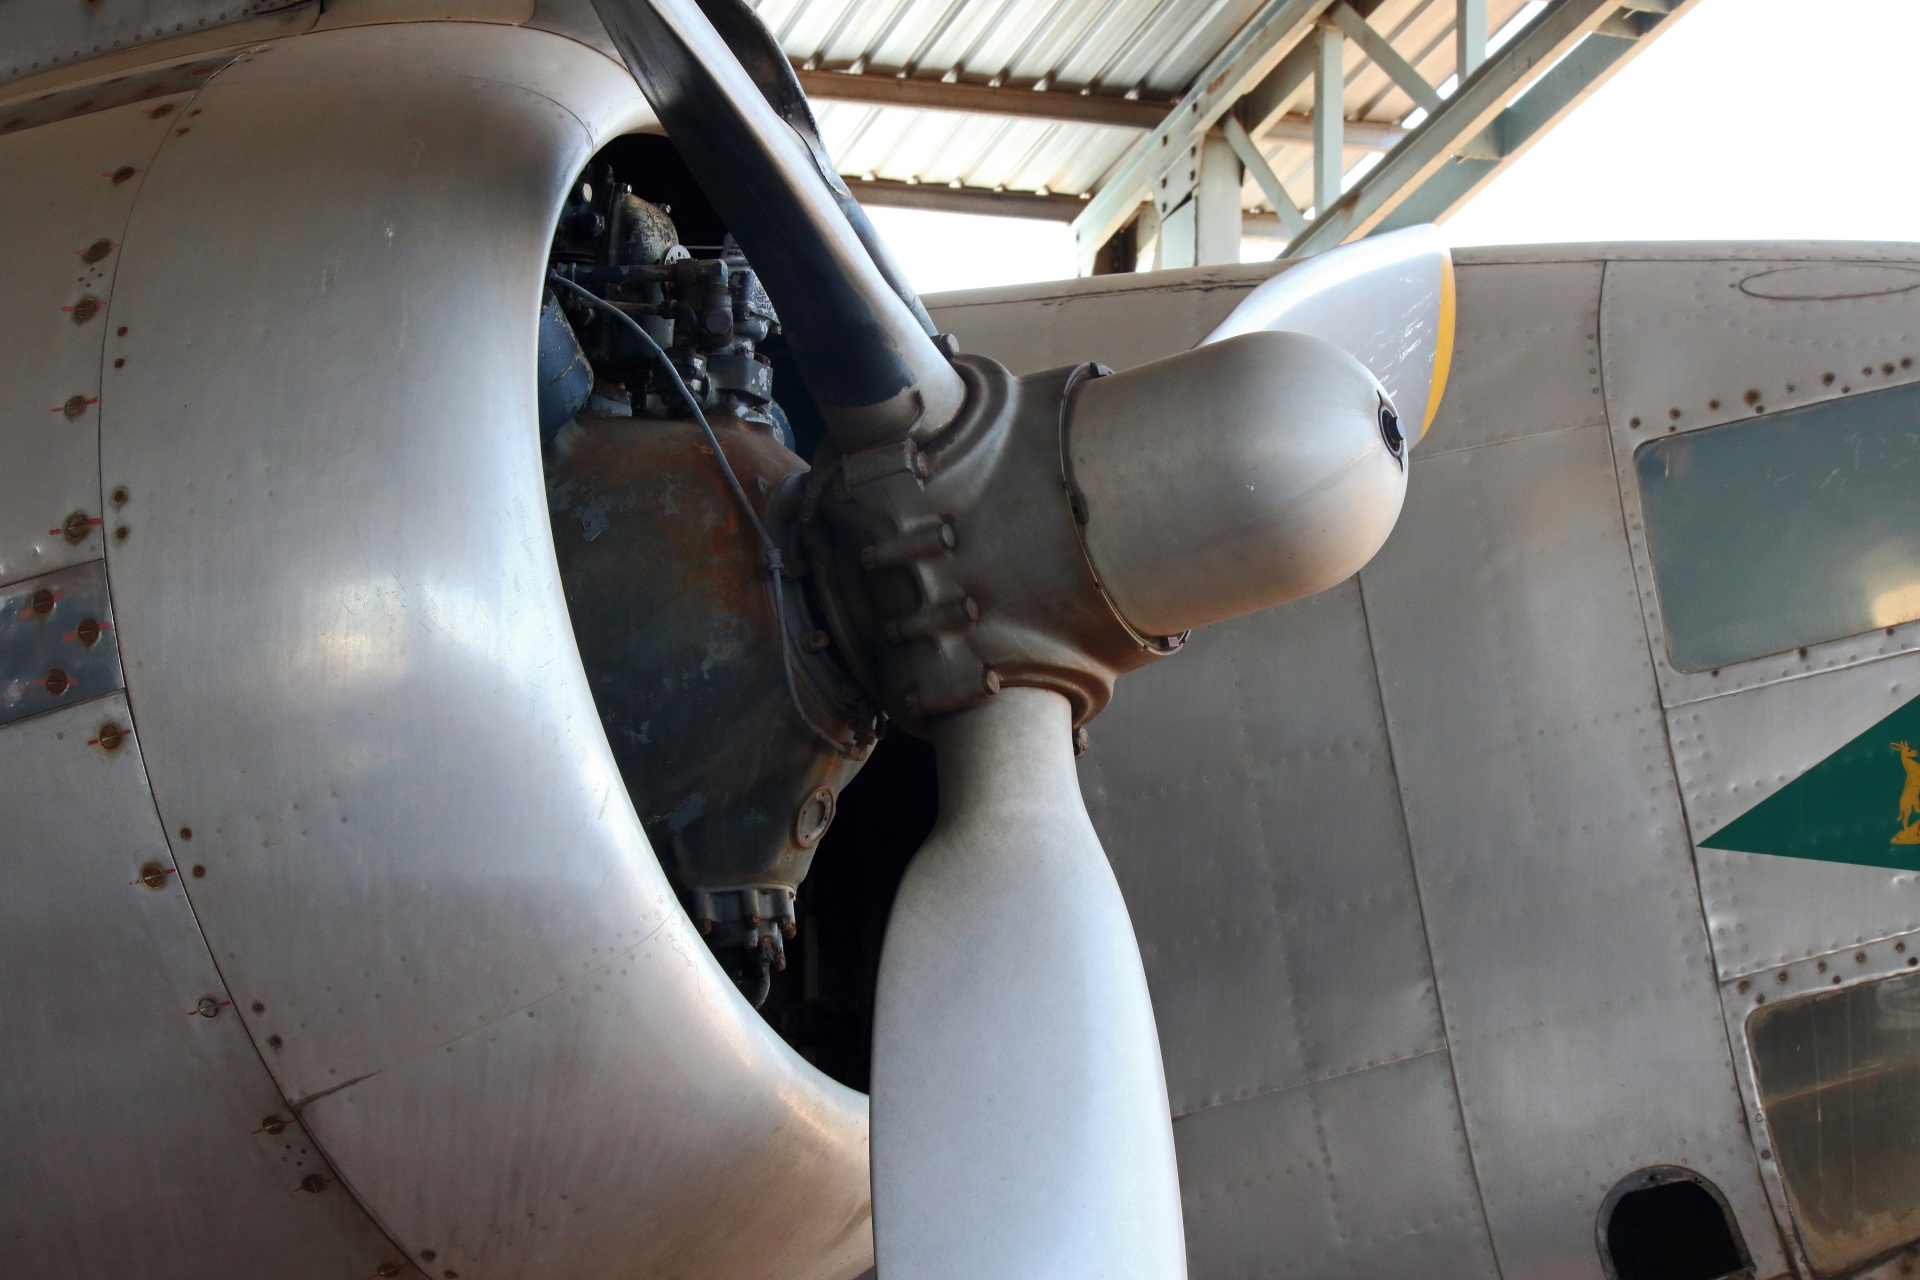 View Of Propeller Of Vintage Plane